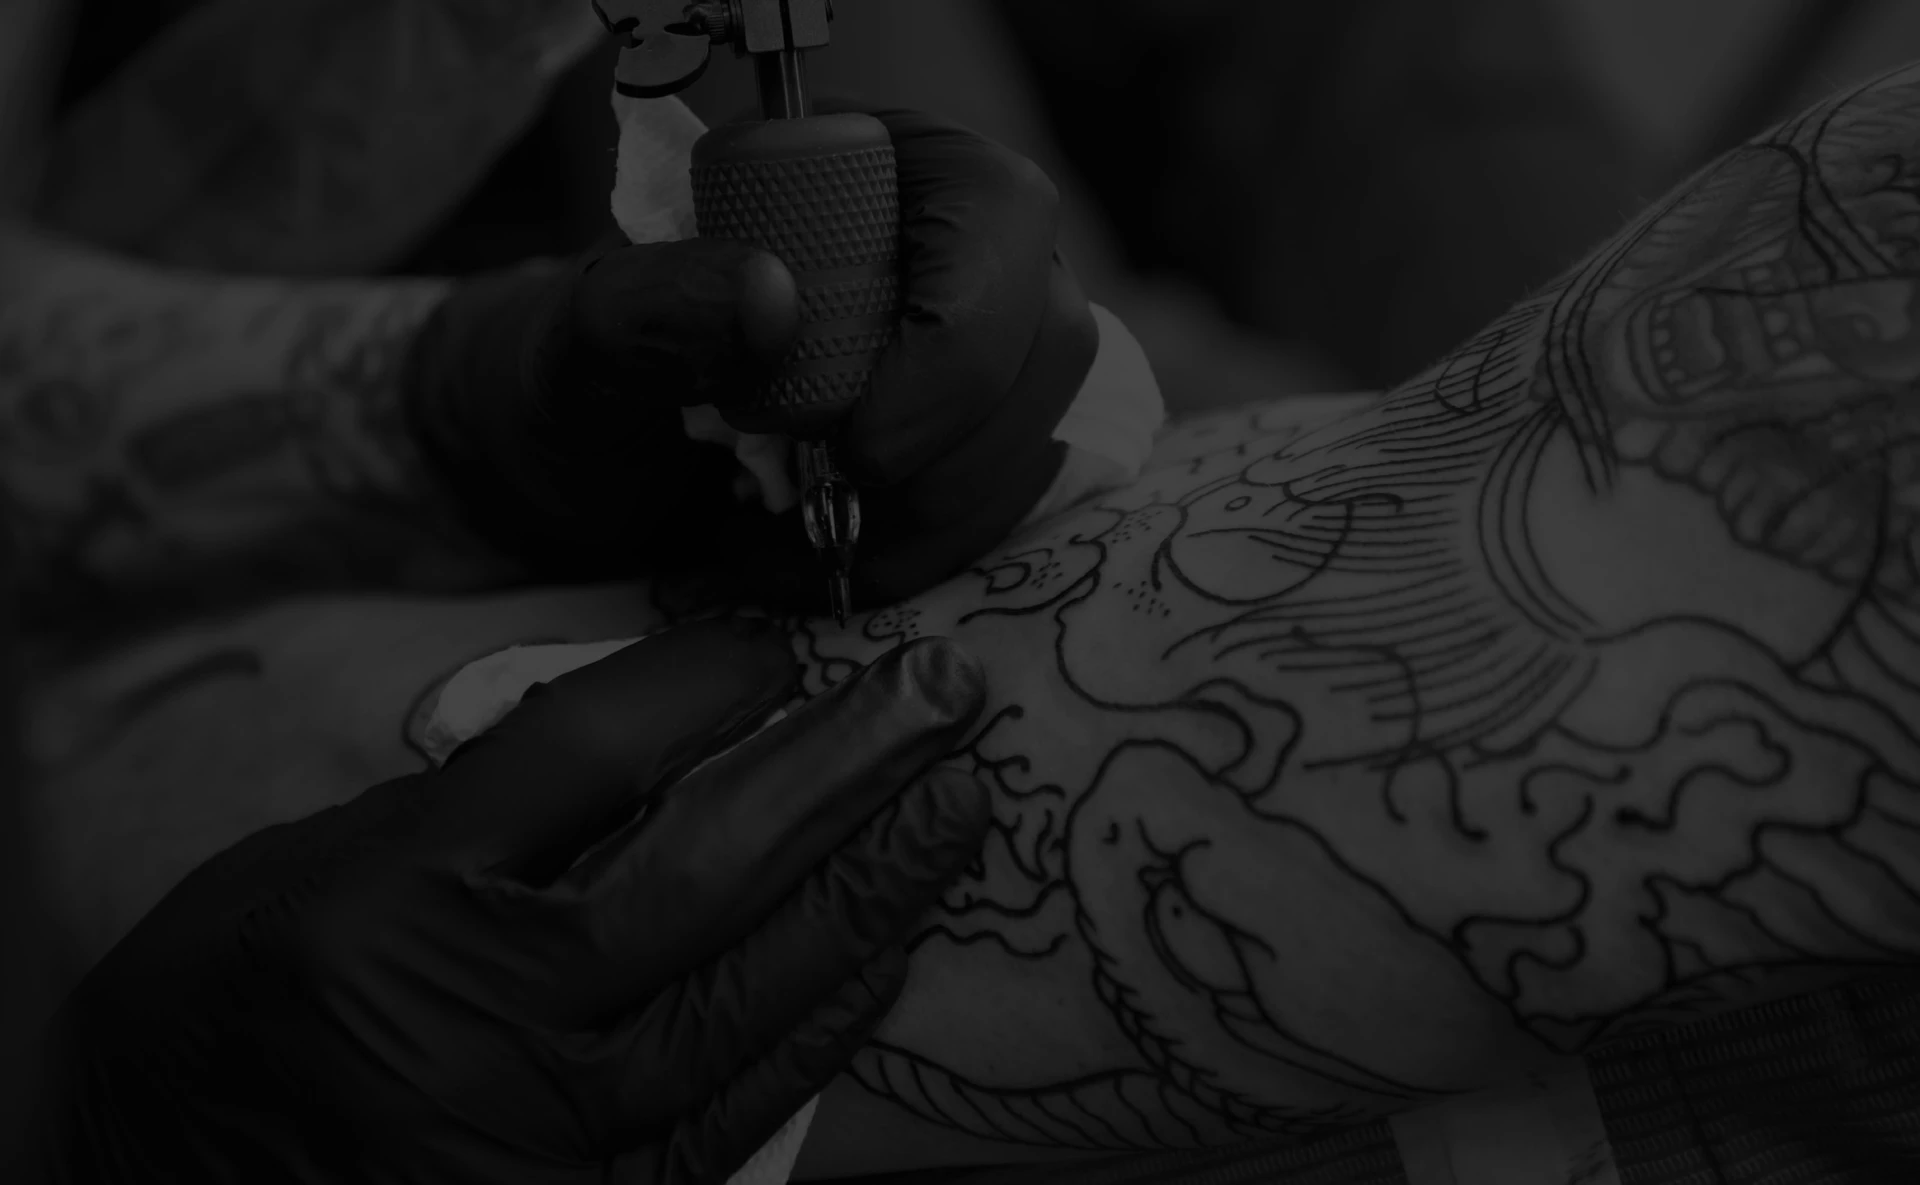 artist covering up tattoo black white